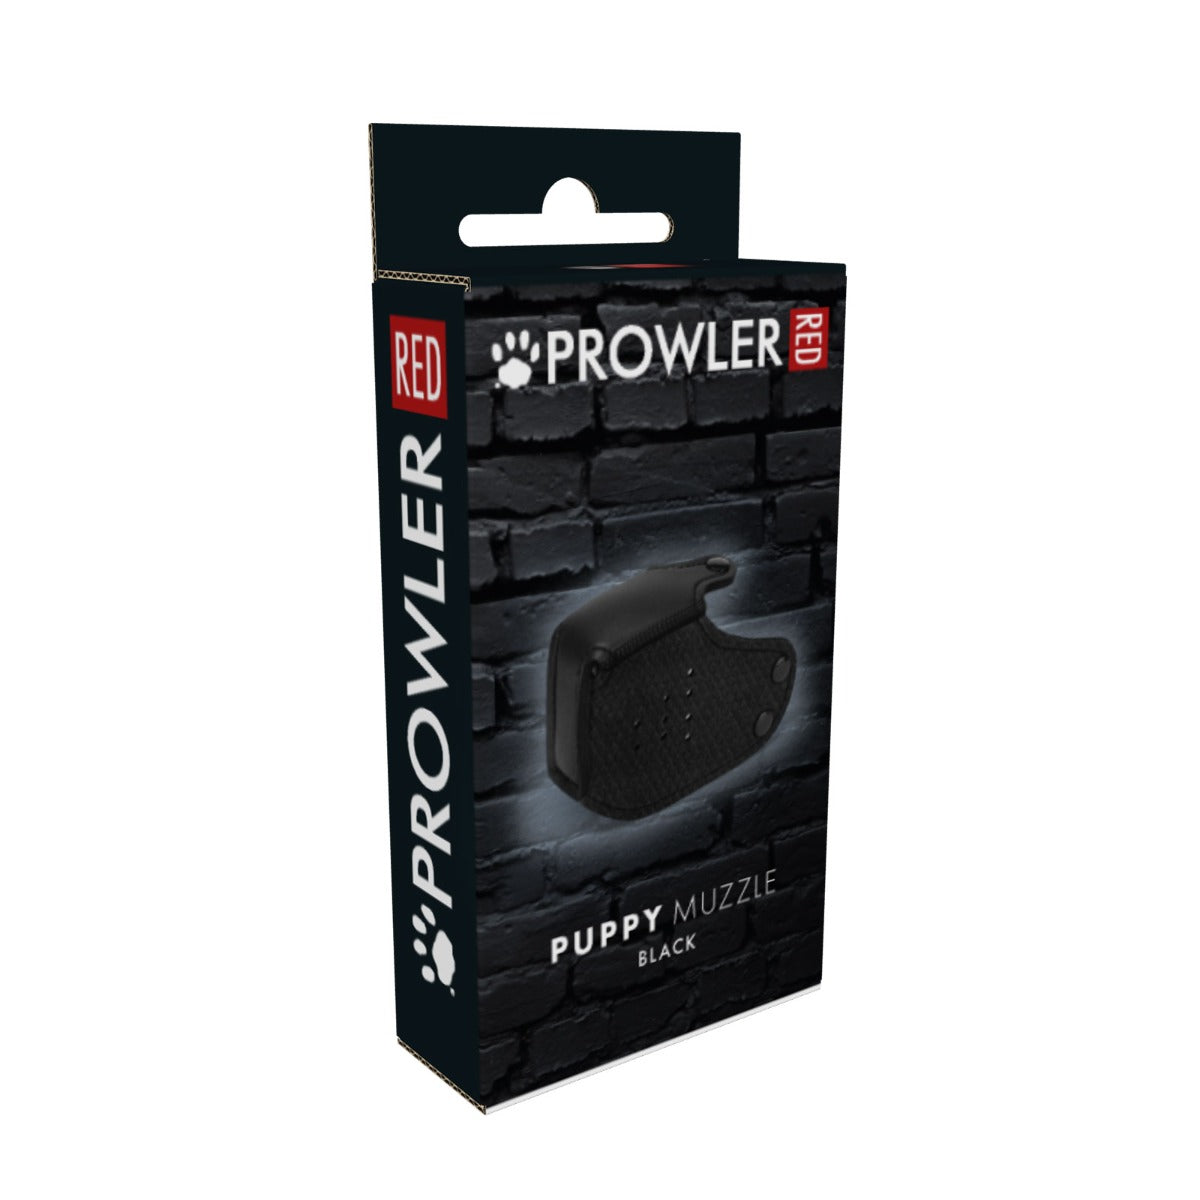 Prowler RED Puppy Muzzle Black (8066304114927)